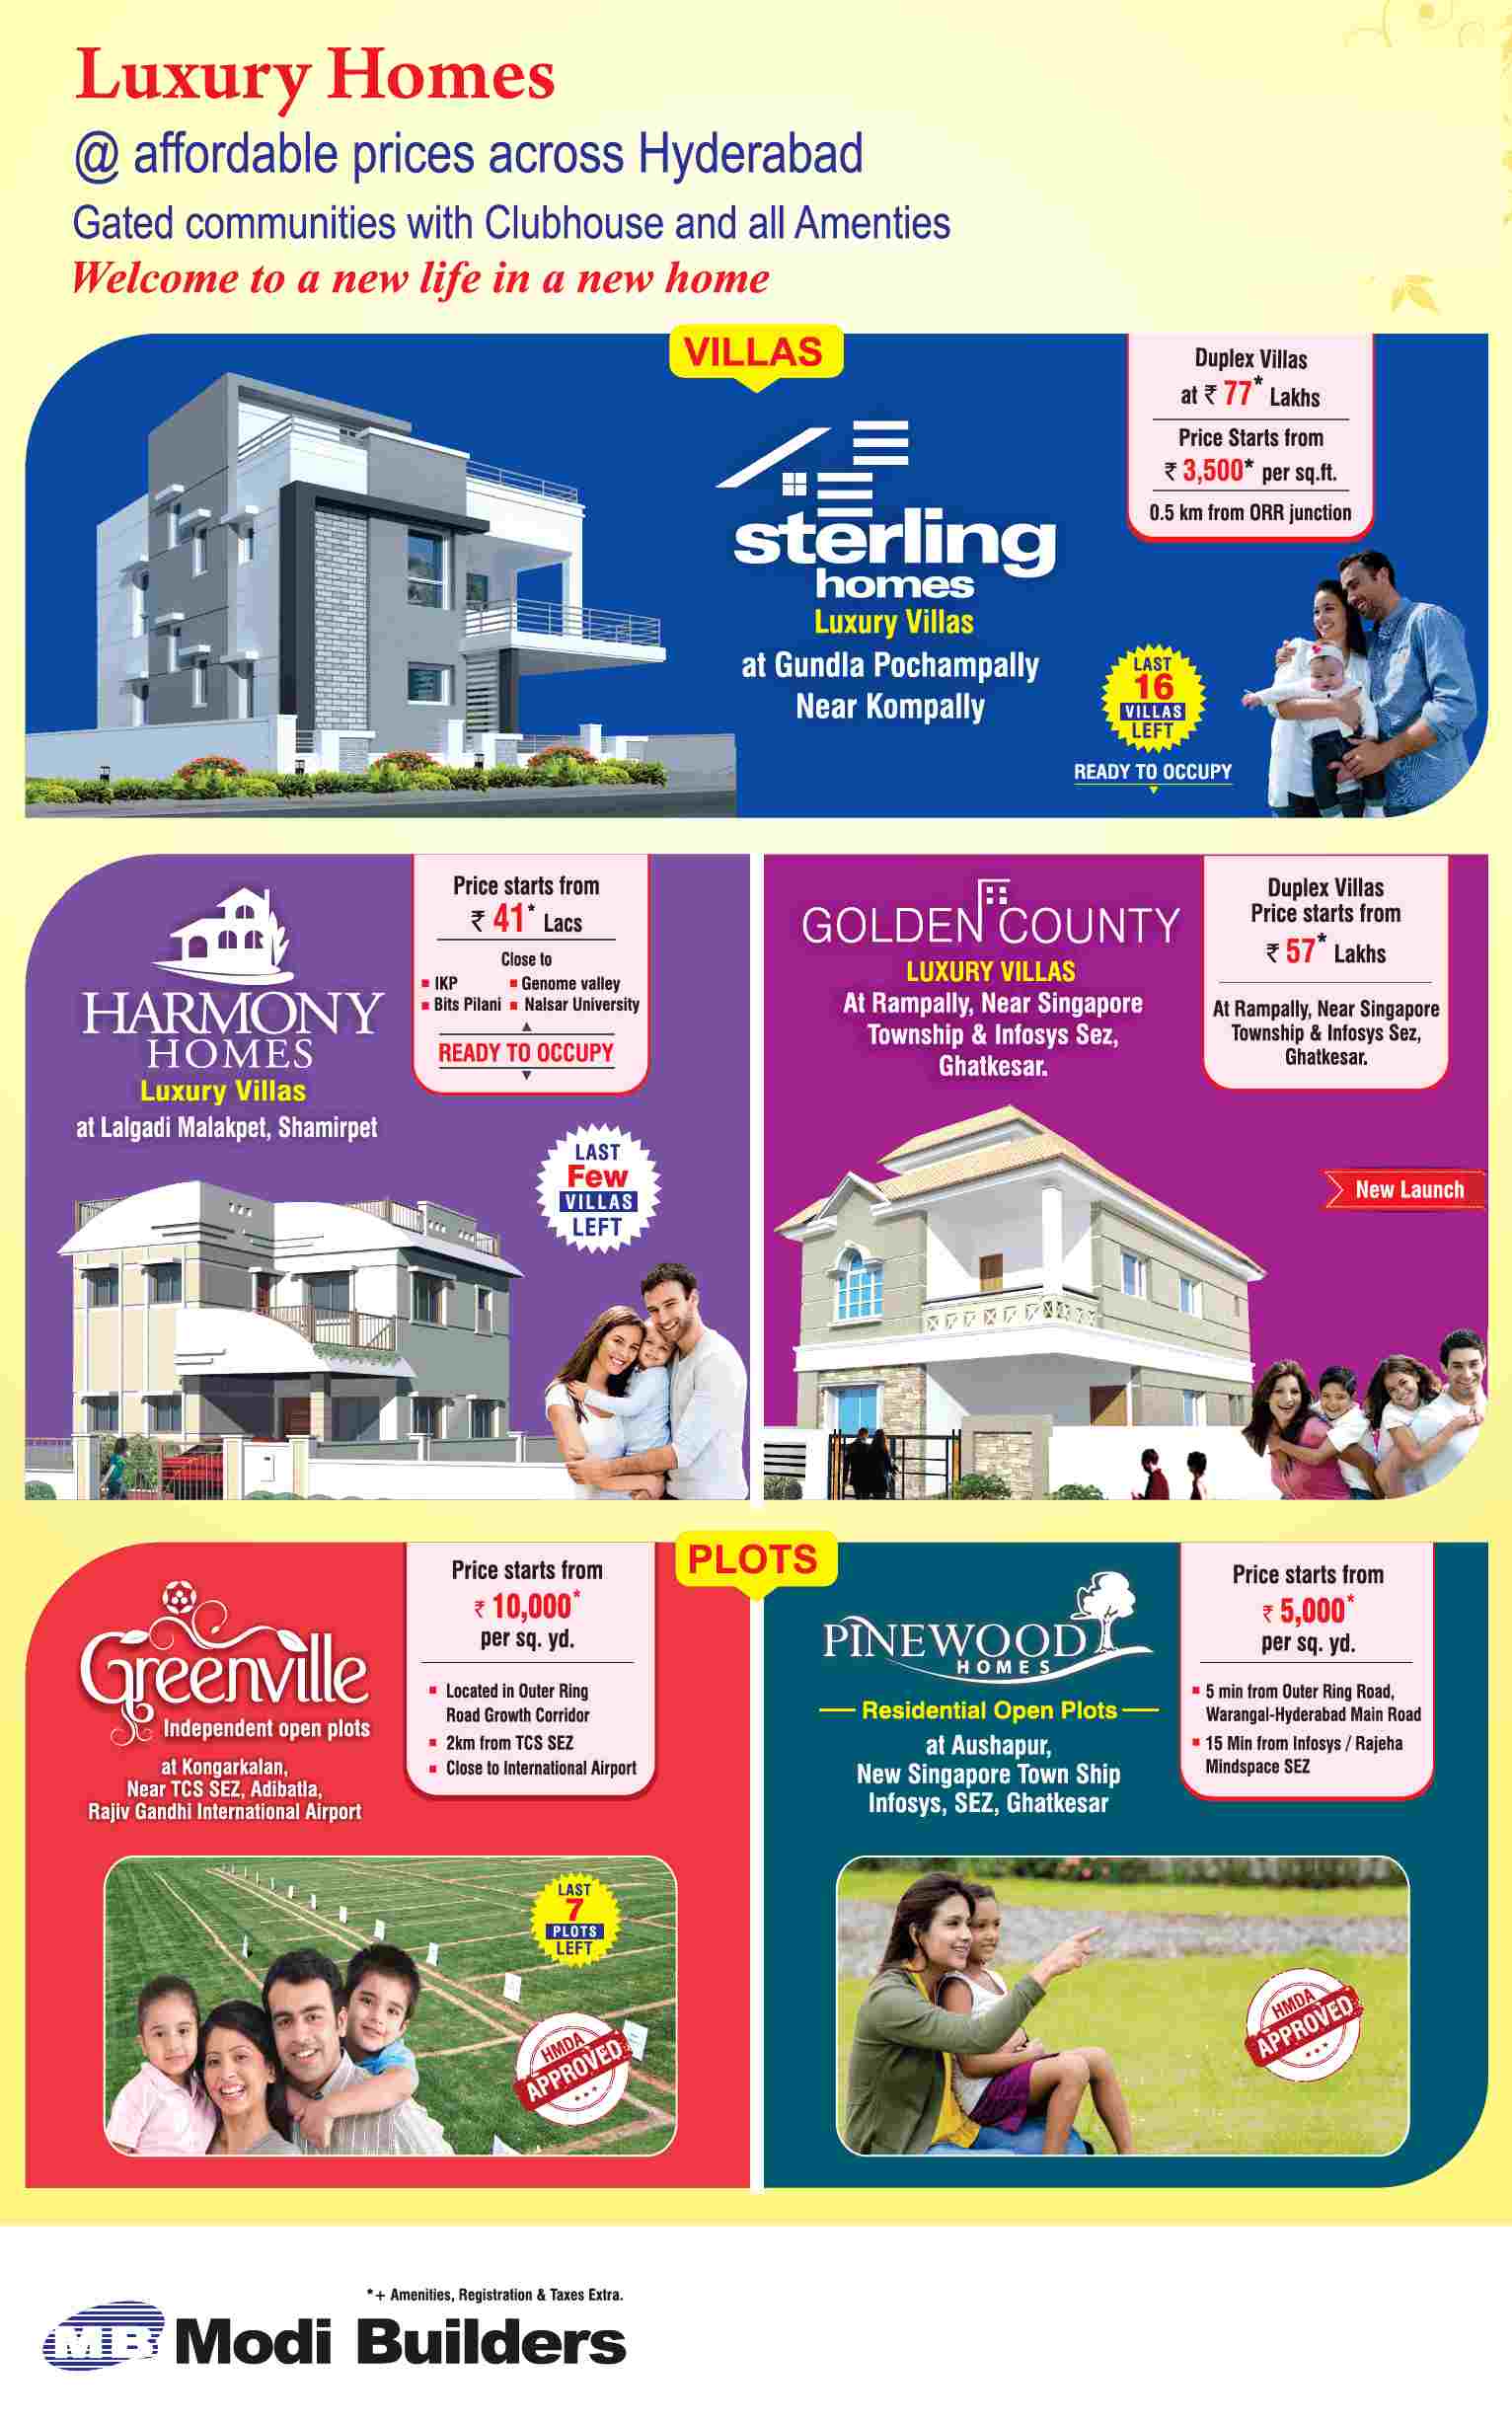 Invest in gated community Modi homes with clubhouse & all amenities in Hyderabad Update